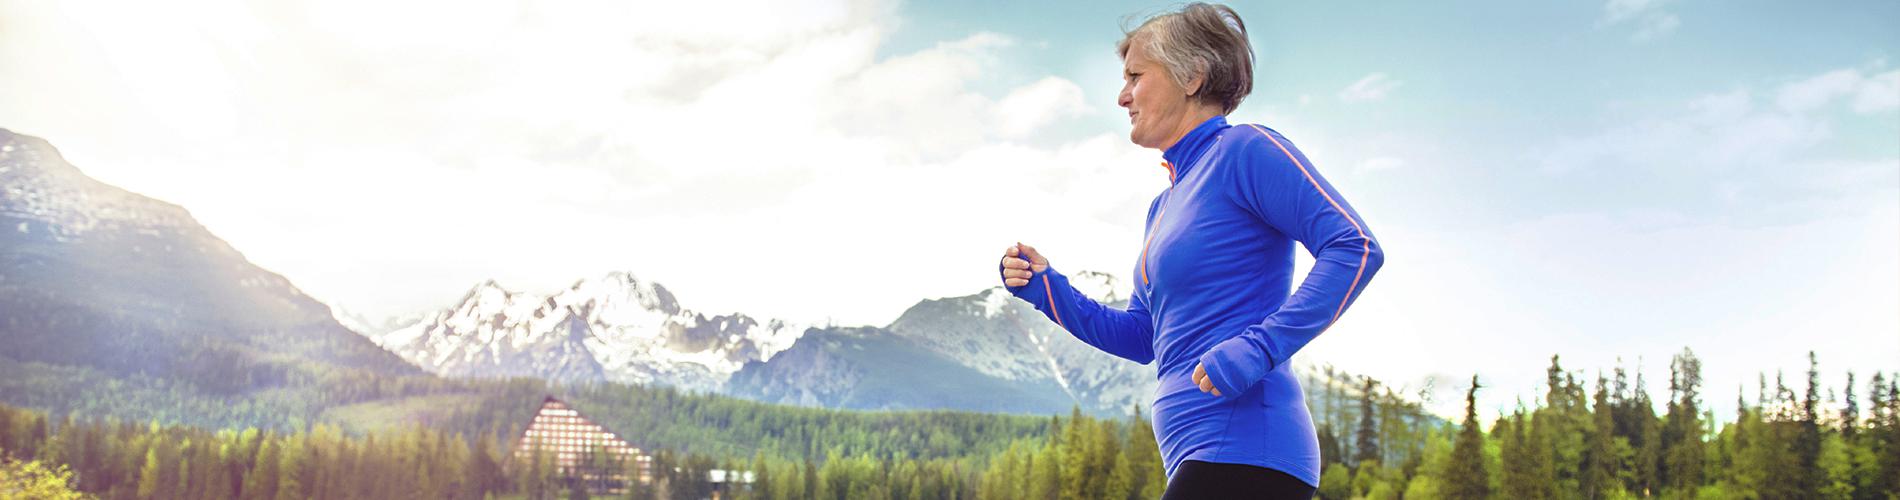 Should Seniors Return to Running After Hip Replacement?